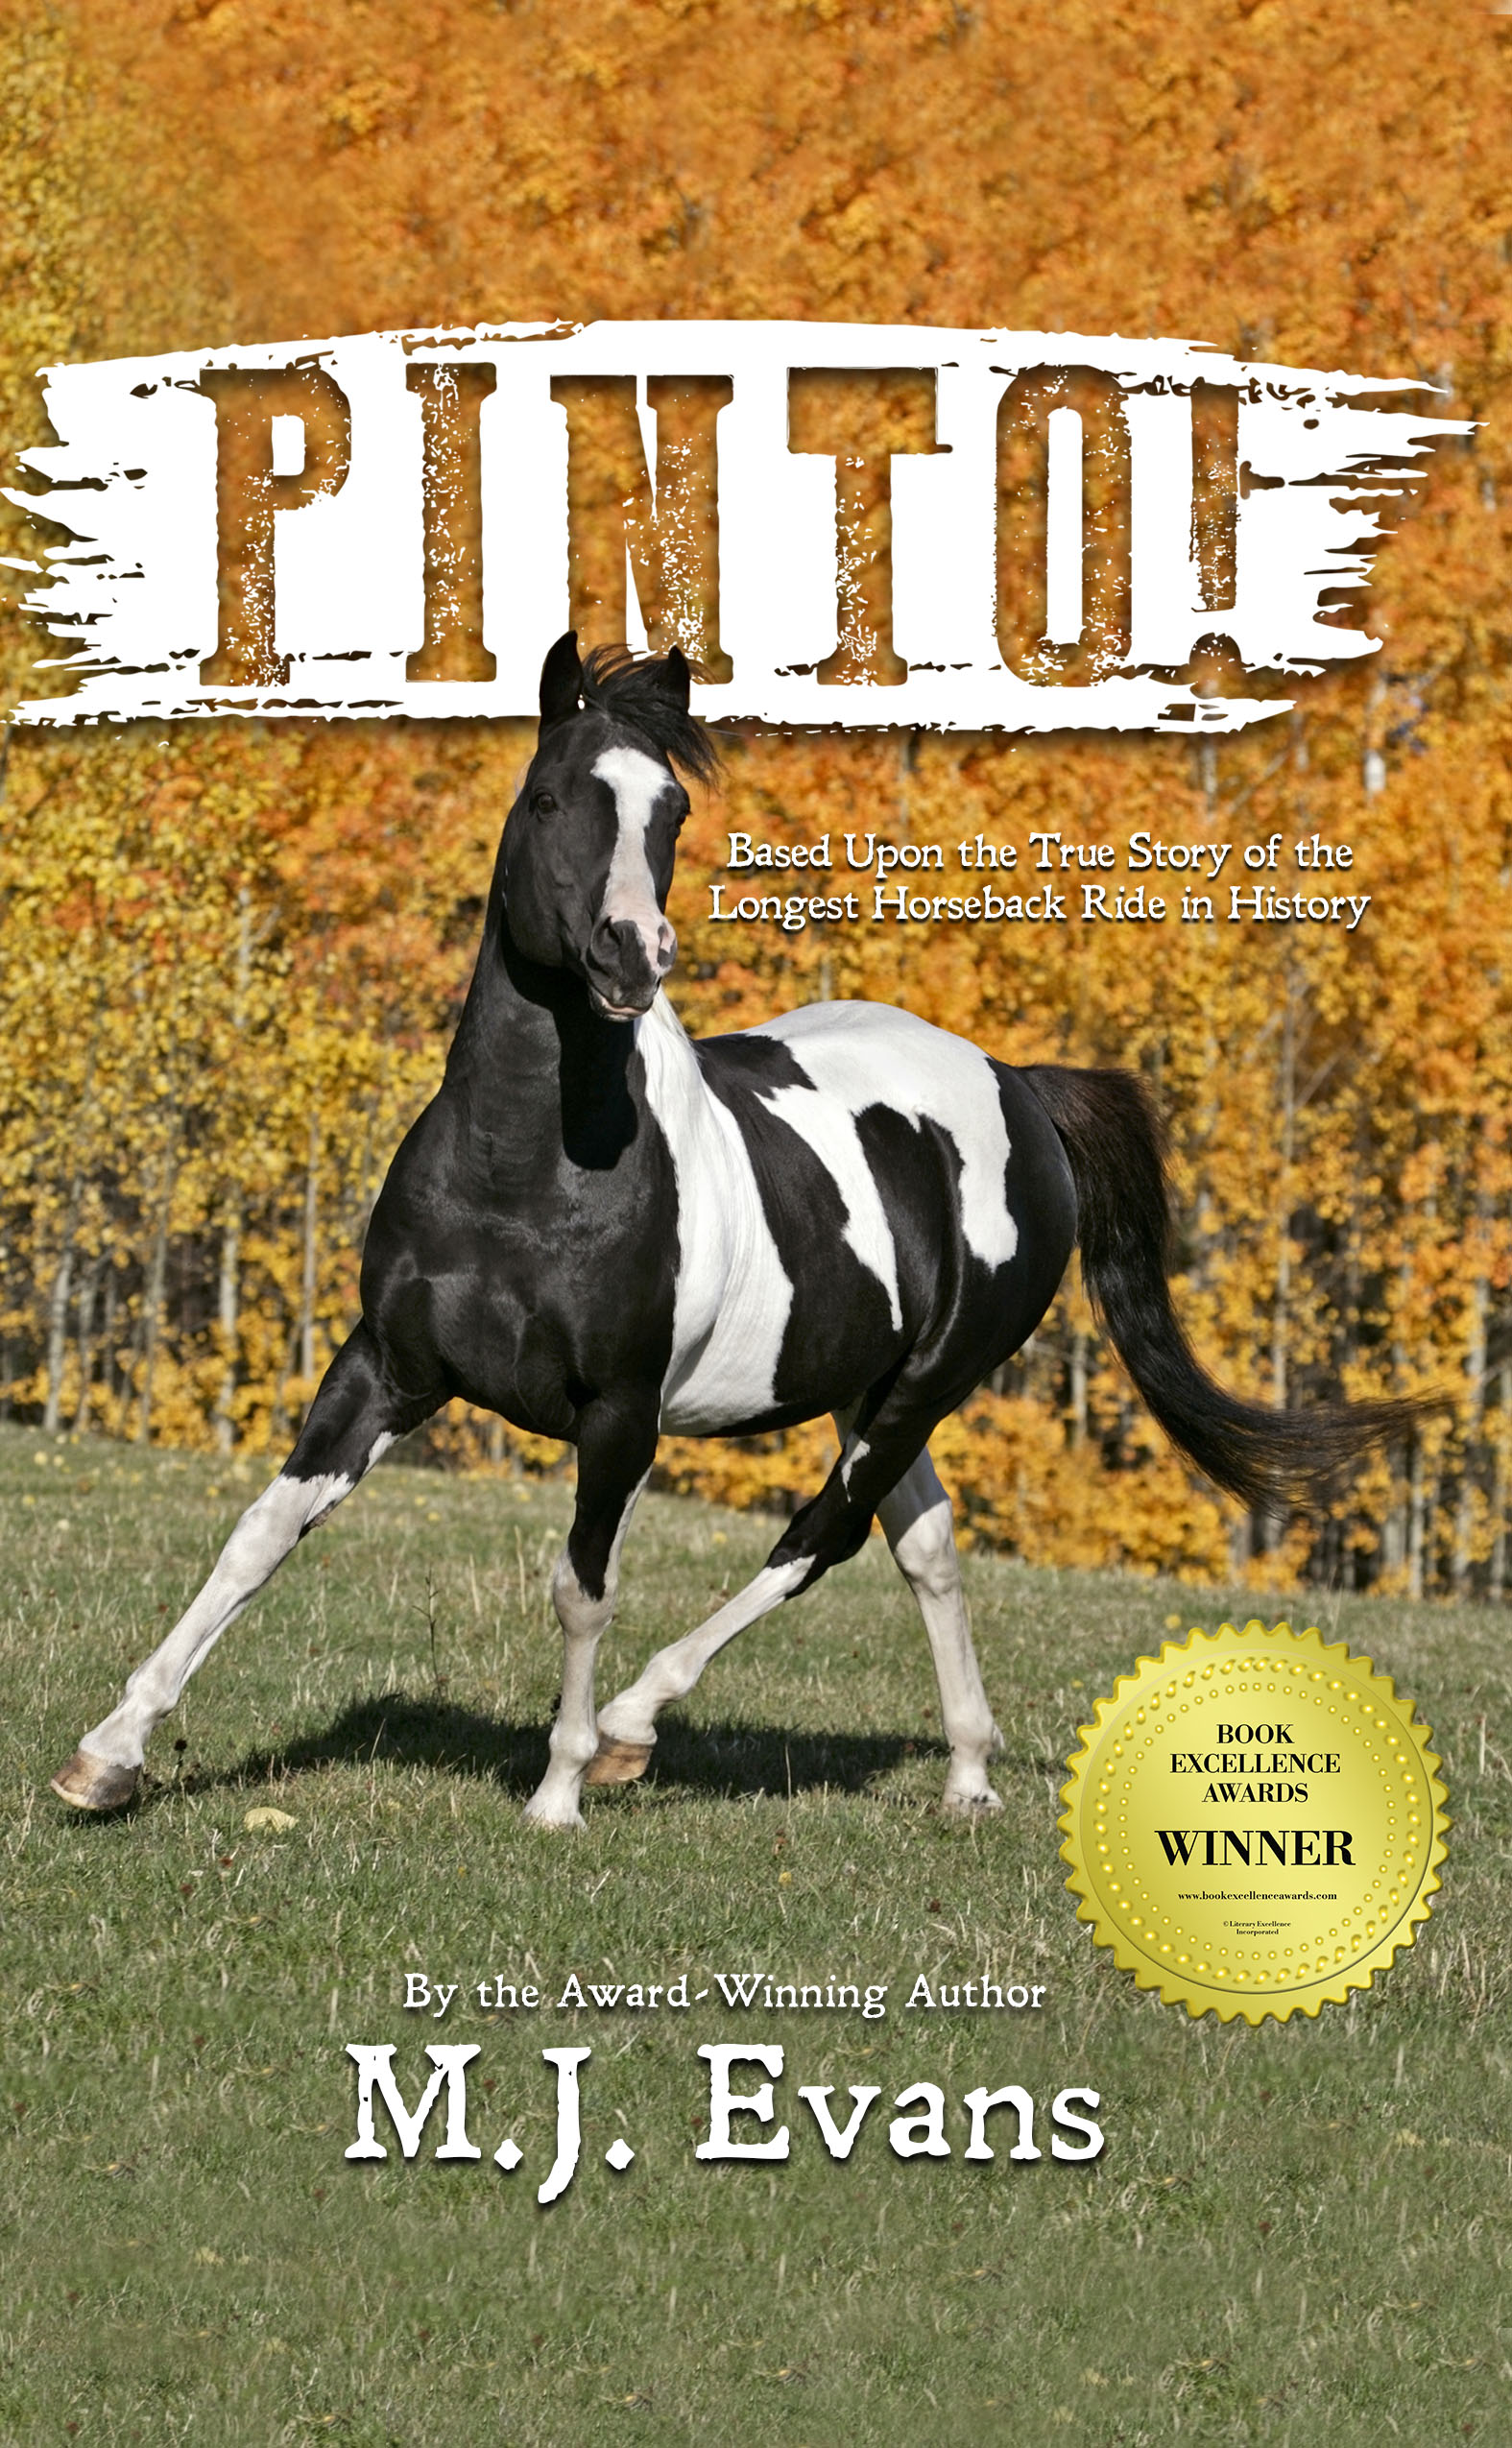 The cover depicts a black and white horse under the title banner: PINTO!